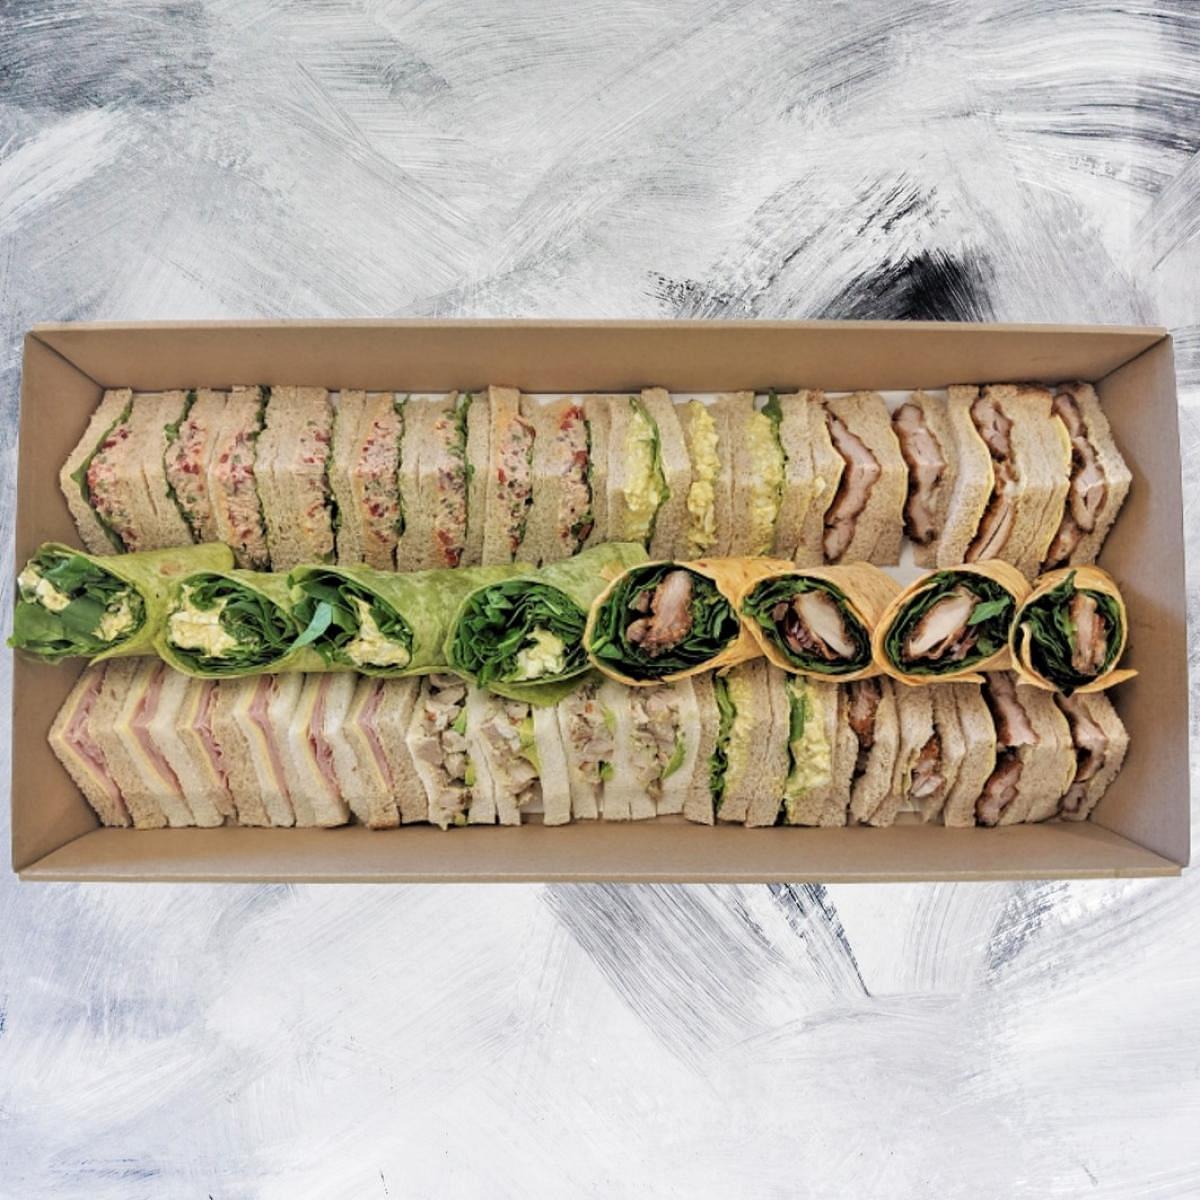 Wrap and Sandwich Collection